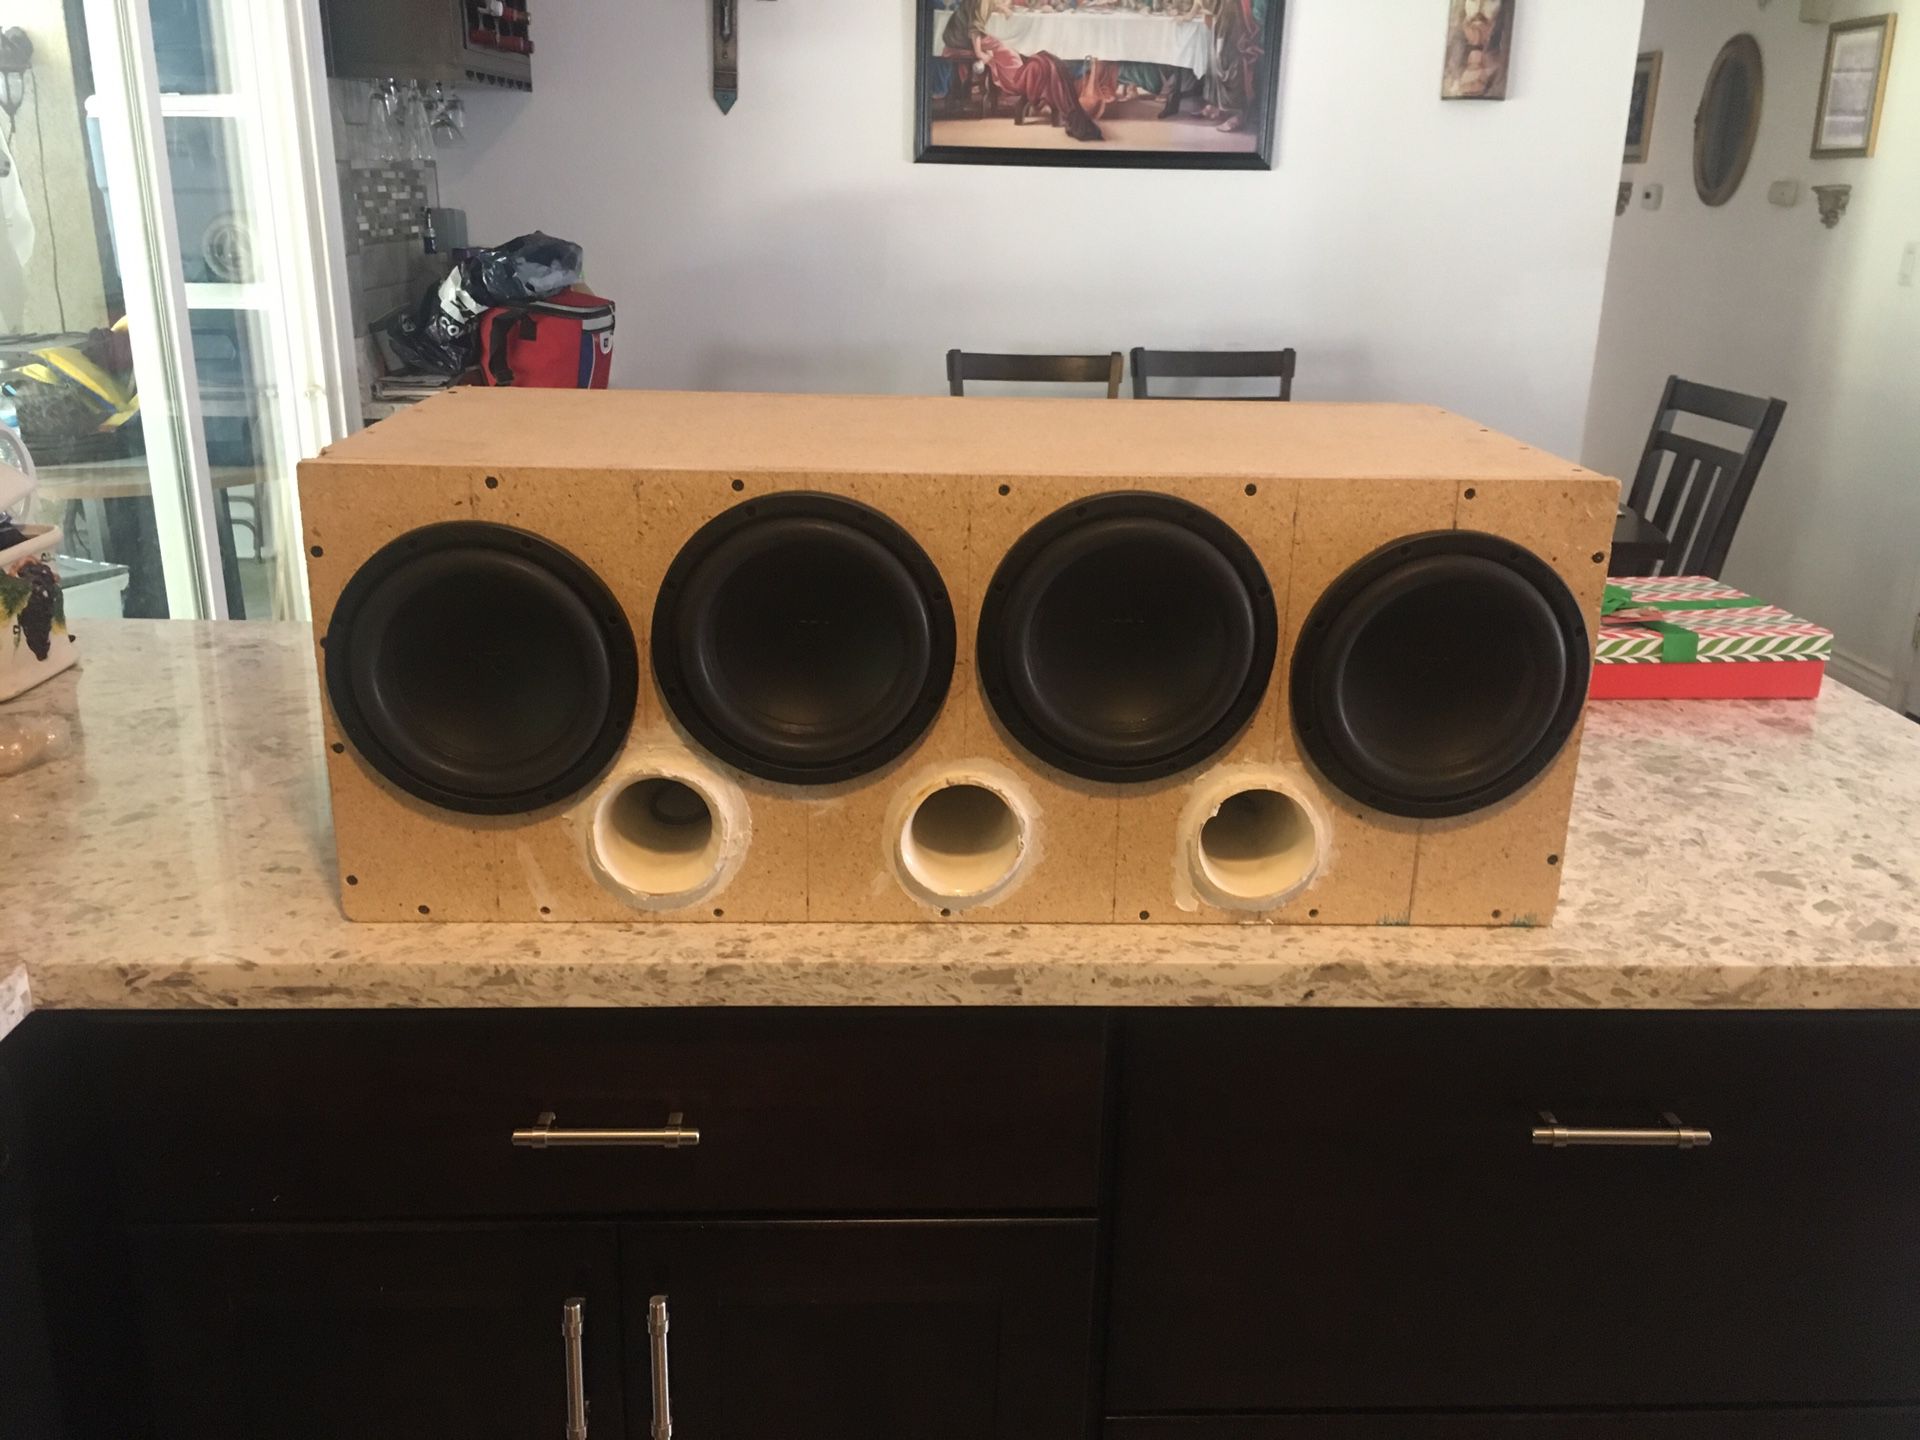 Four 8” subs in custom ported box southwest